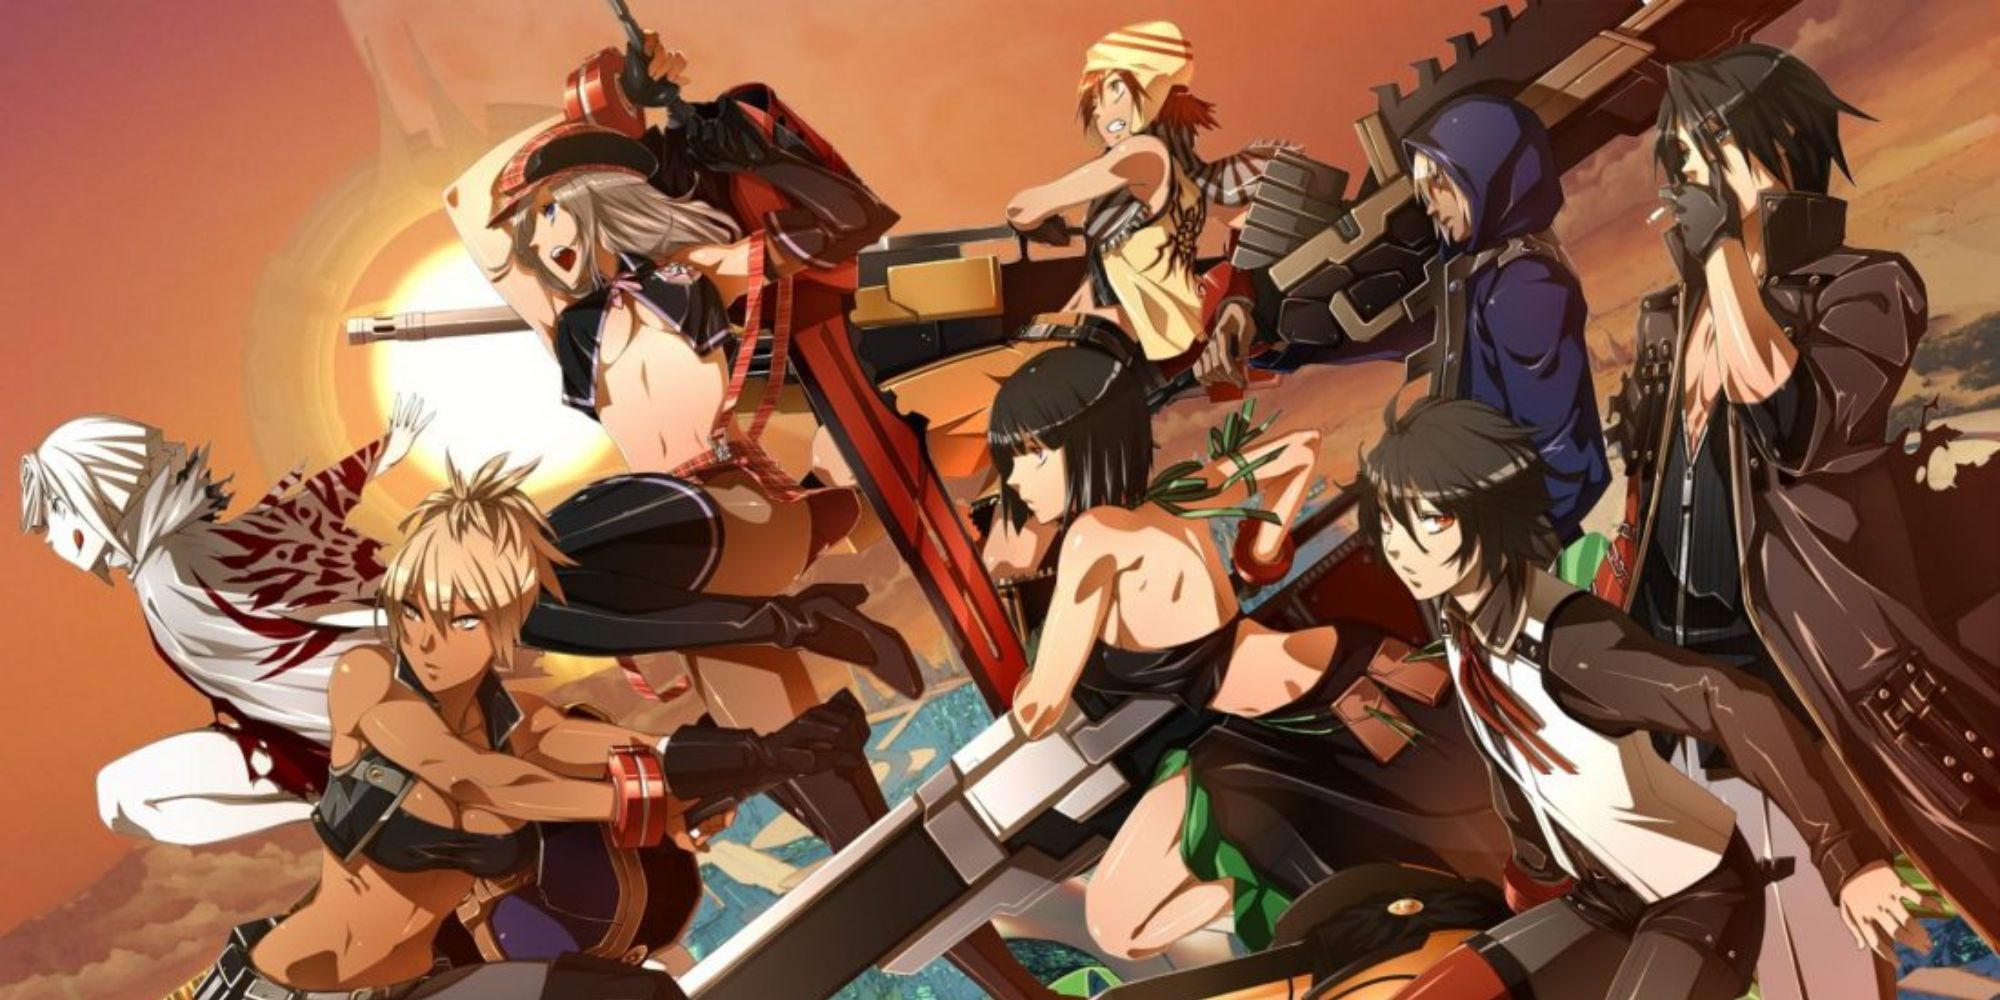 God Eater anime characters